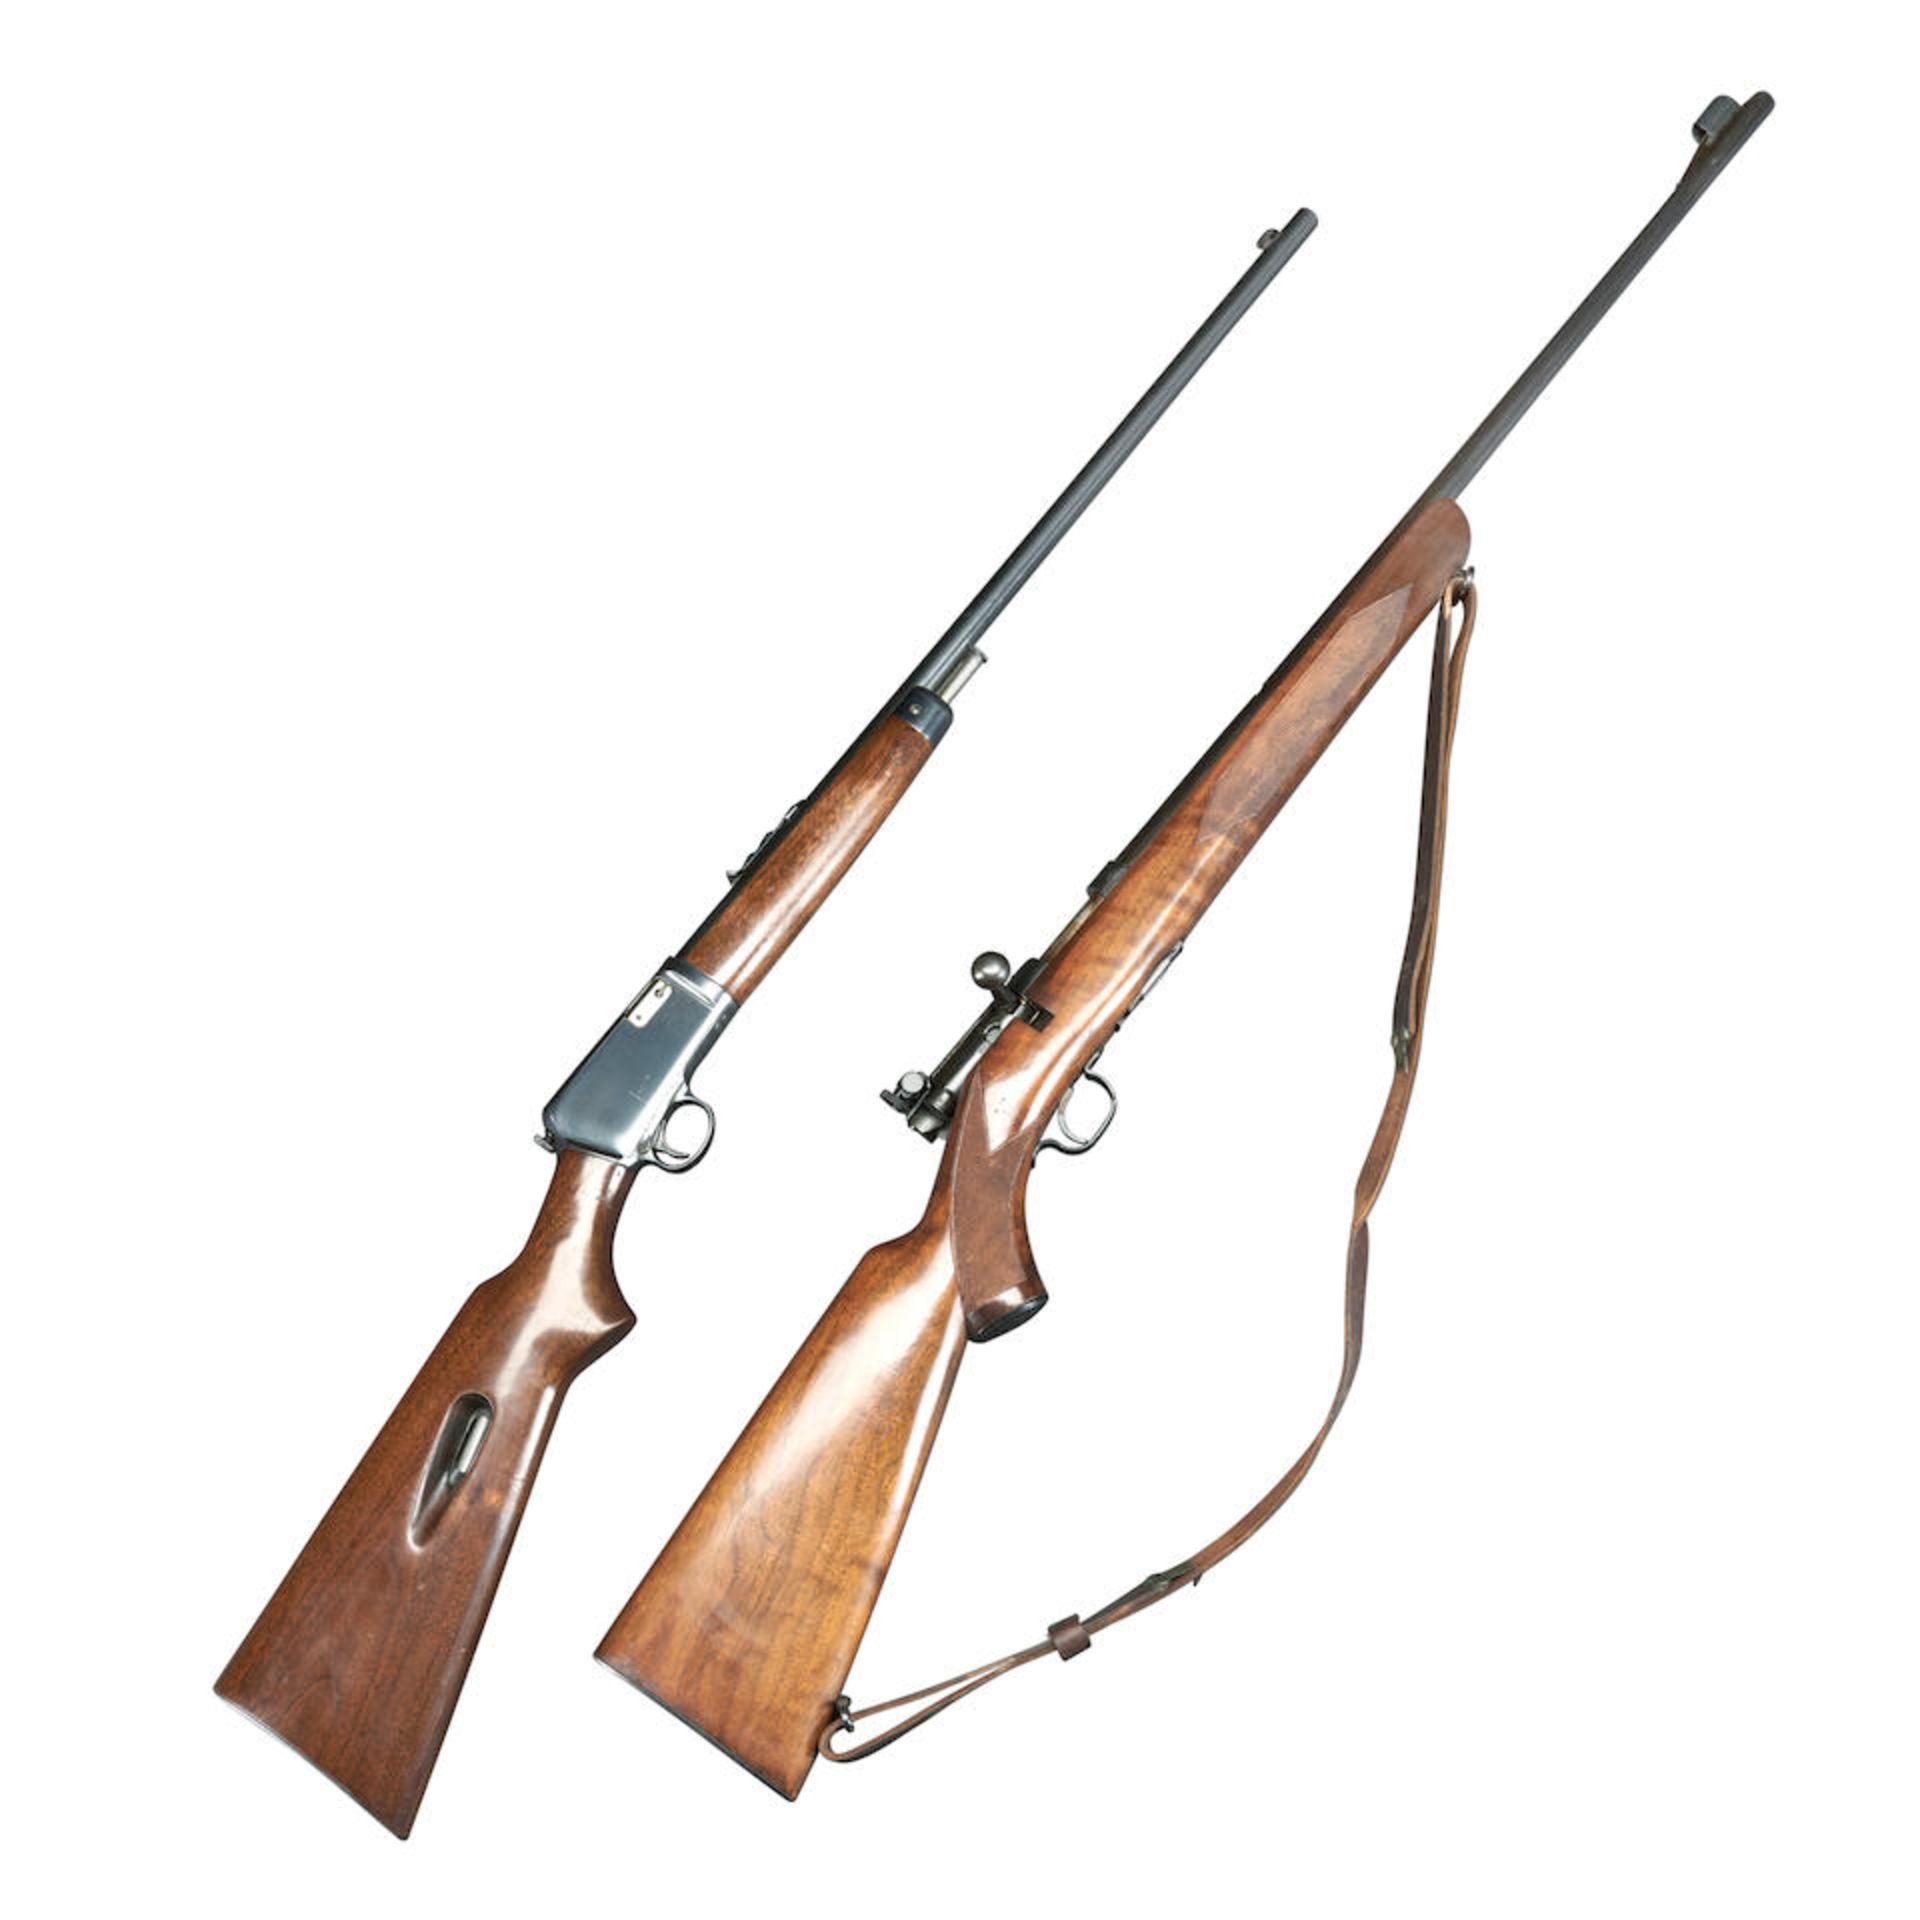 Two Winchester .22 Caliber Sporting Rifles.